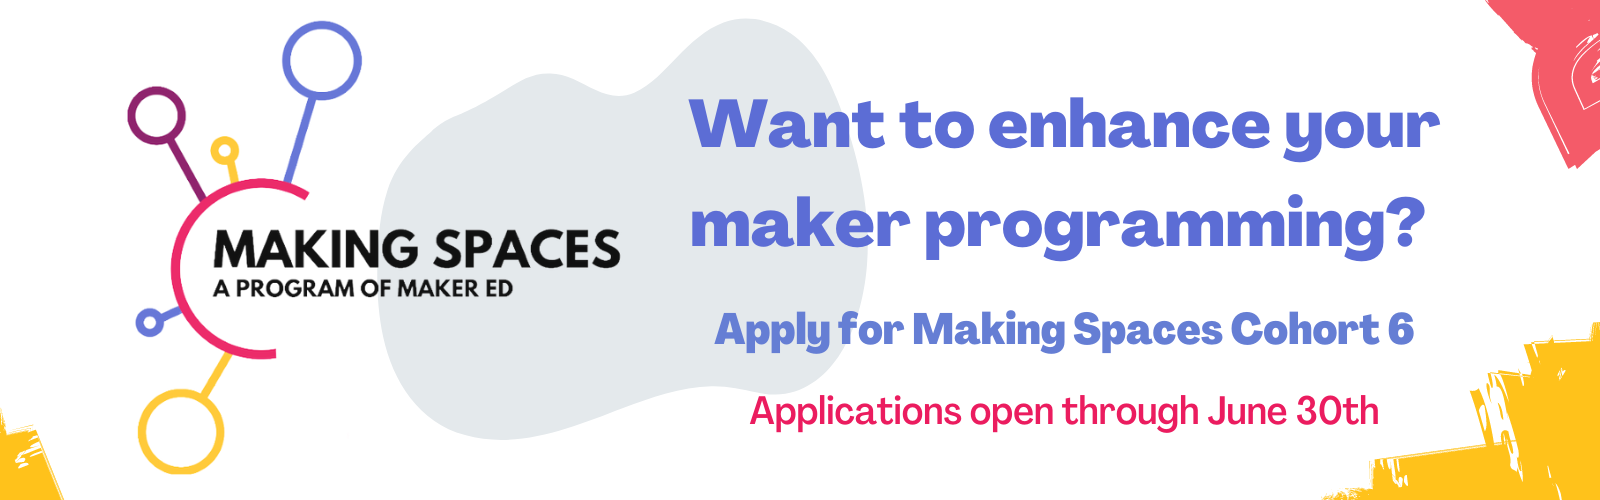 Want to enhance your maker programming? 2022 Making Spaces Application Open